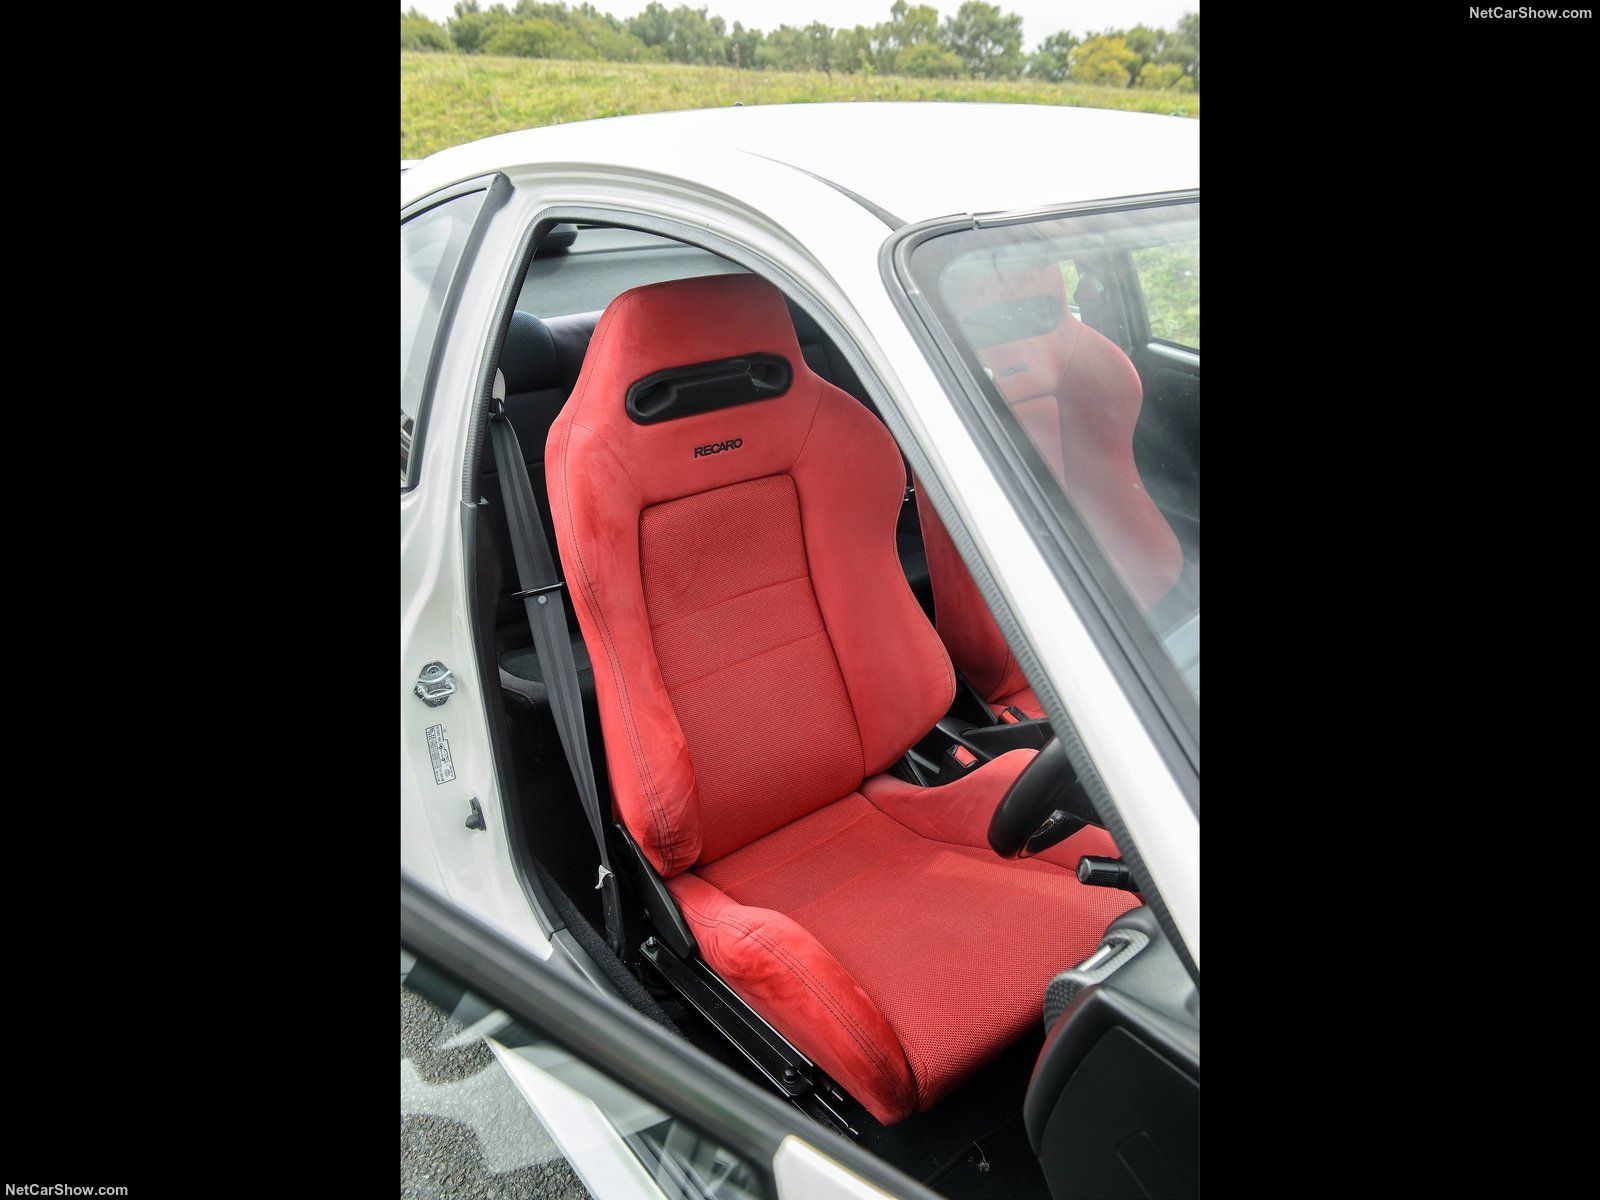 Acura Integra seat, red, view from outside